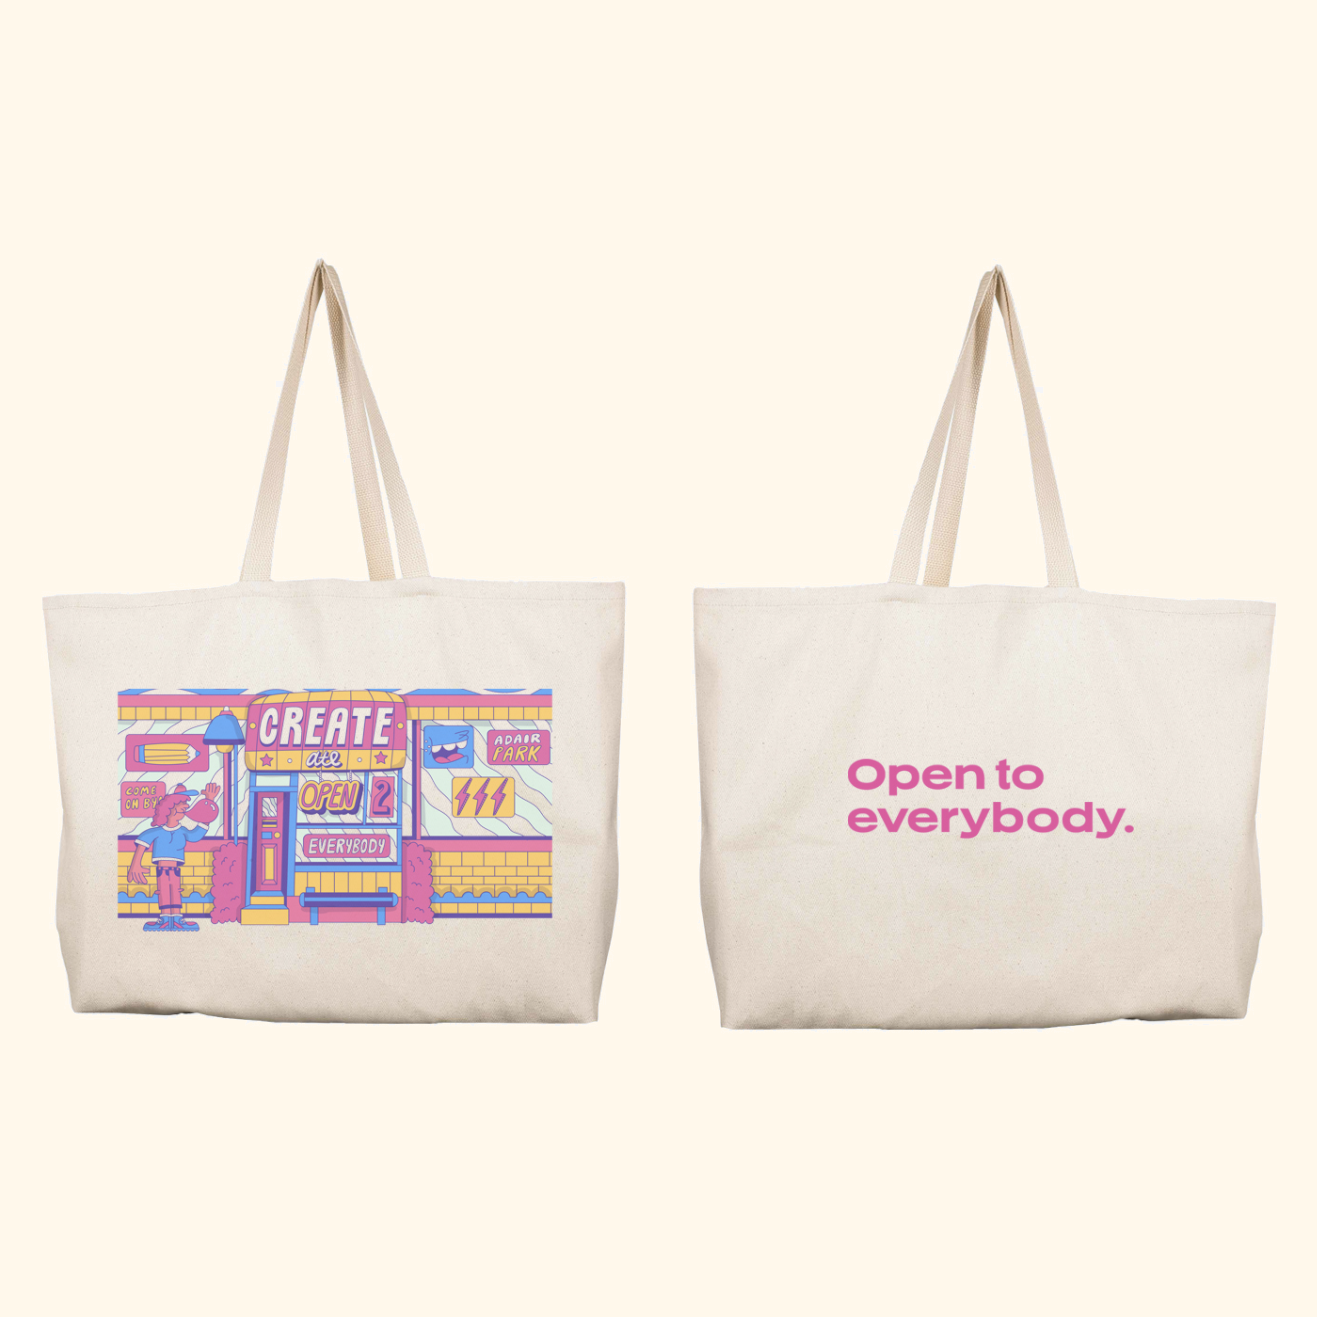 GFB3 "Open to Everybody" tote